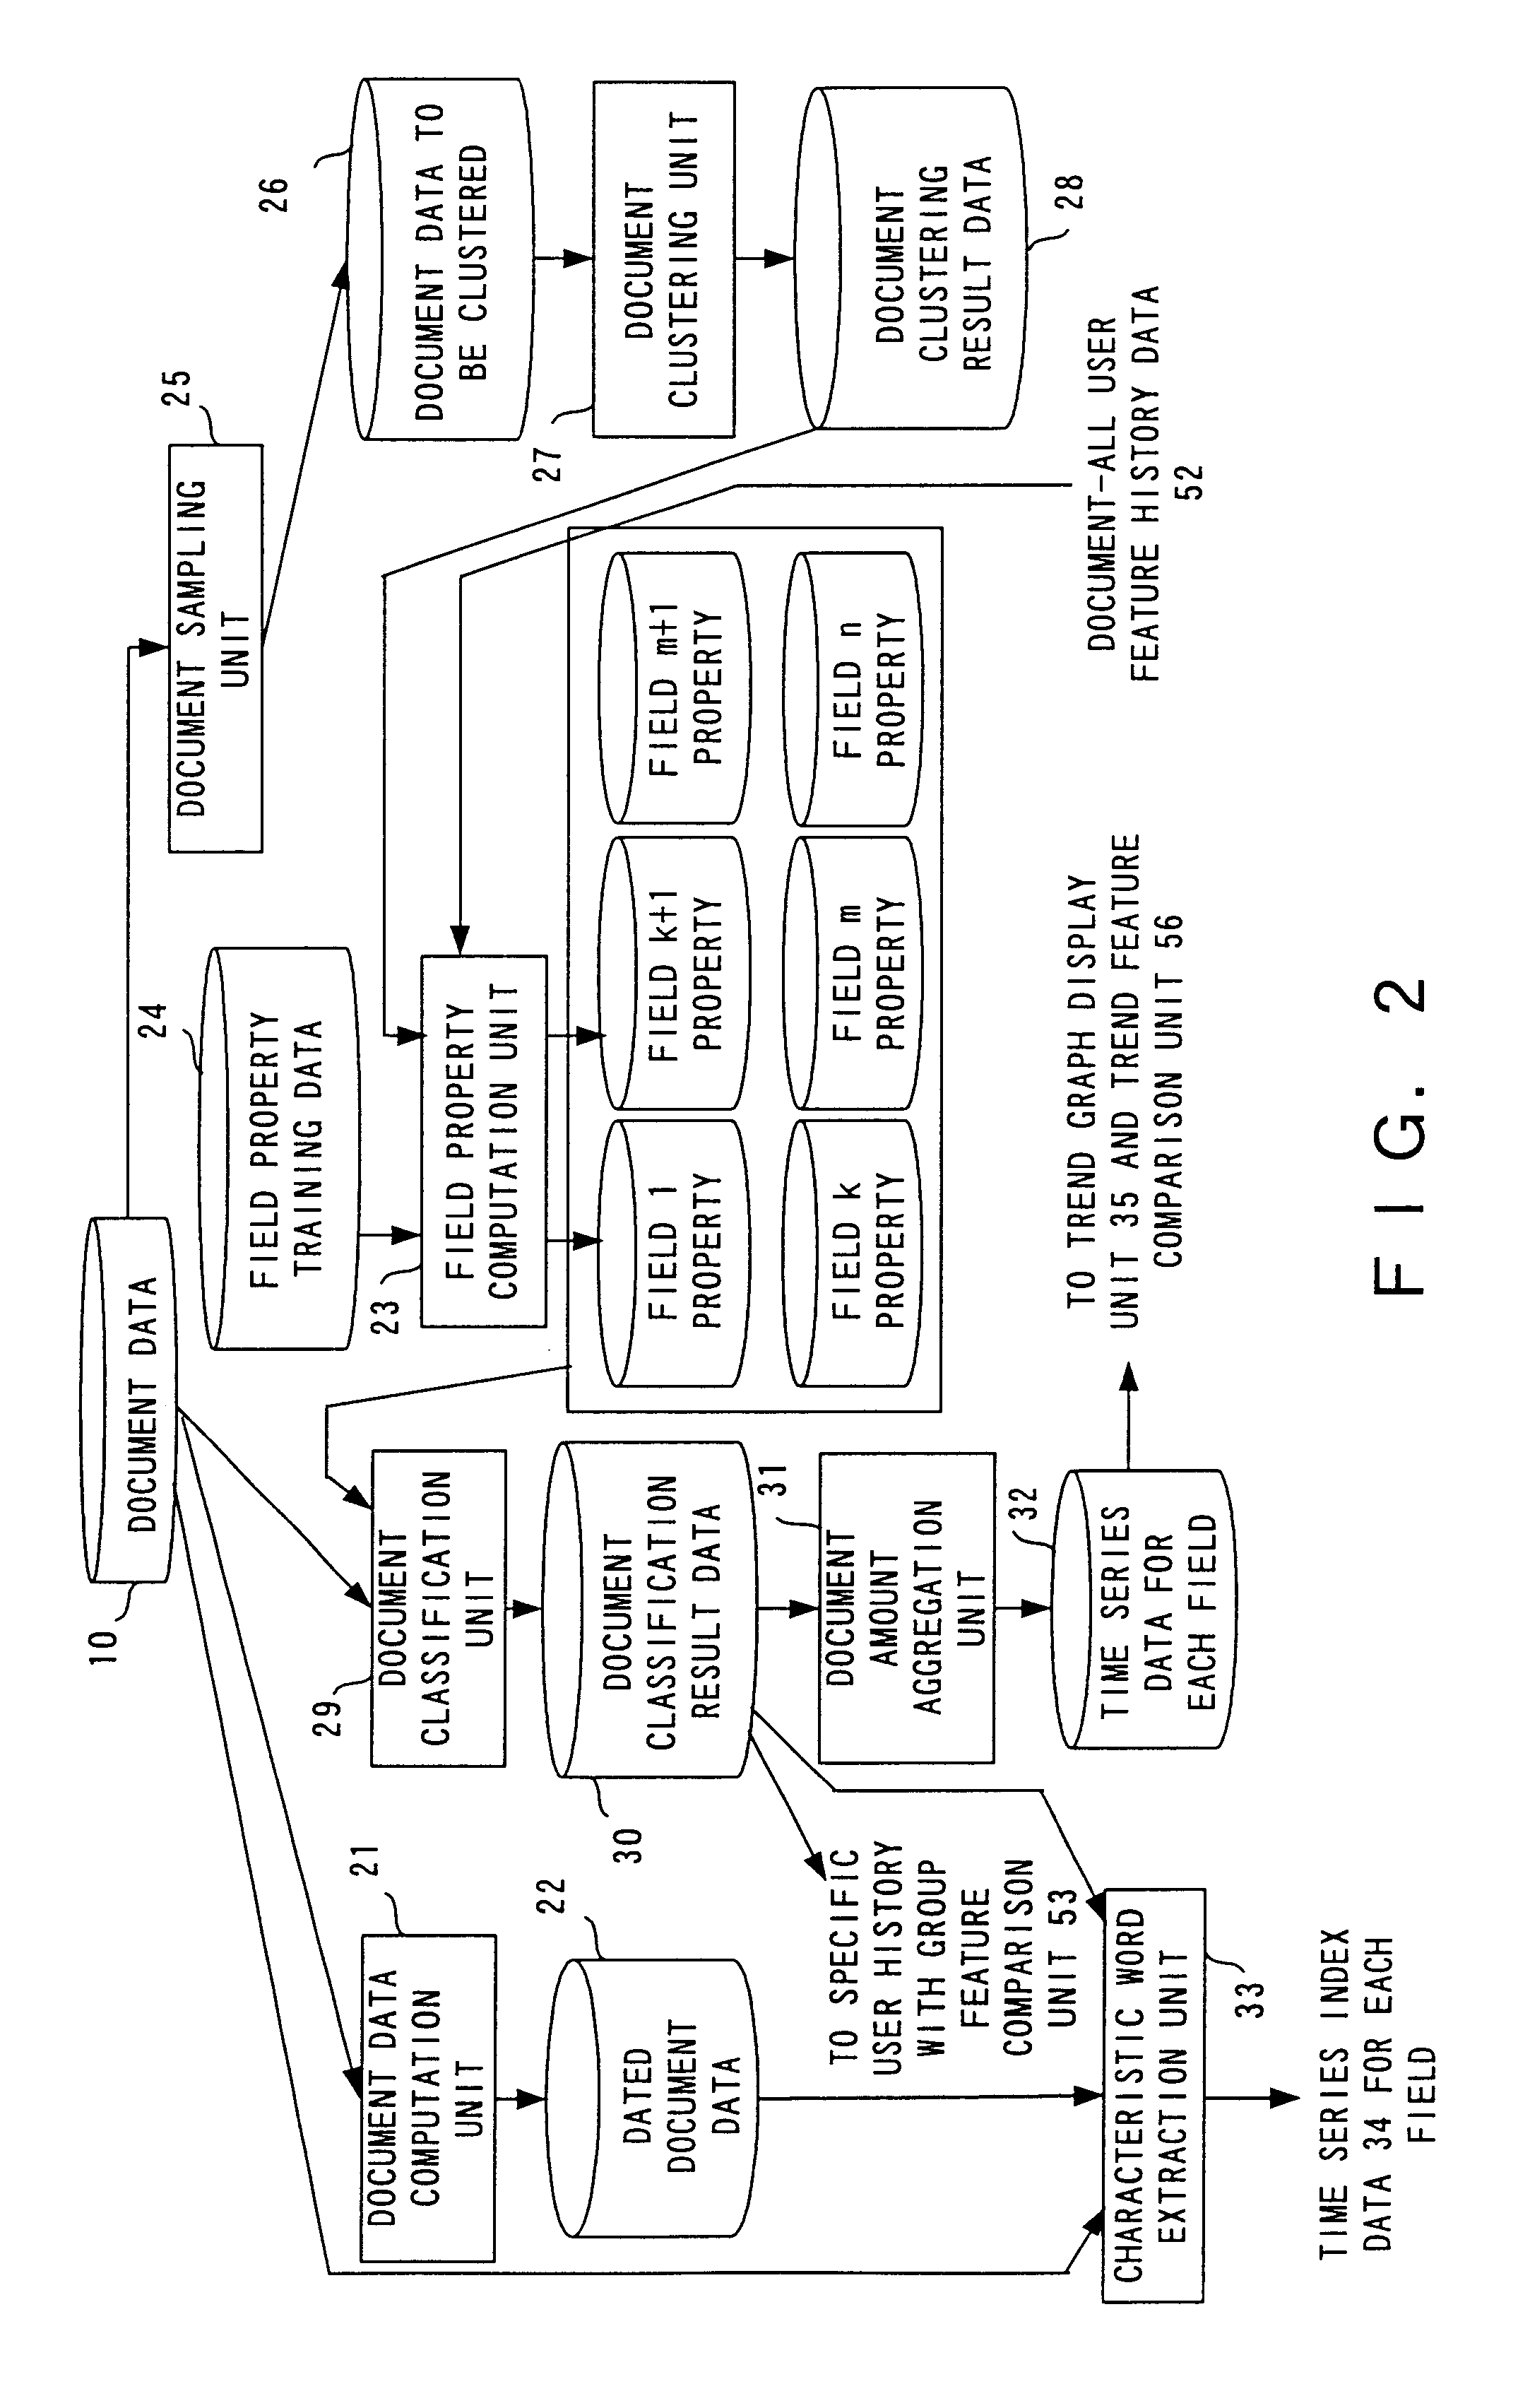 Apparatus and method for presenting document data